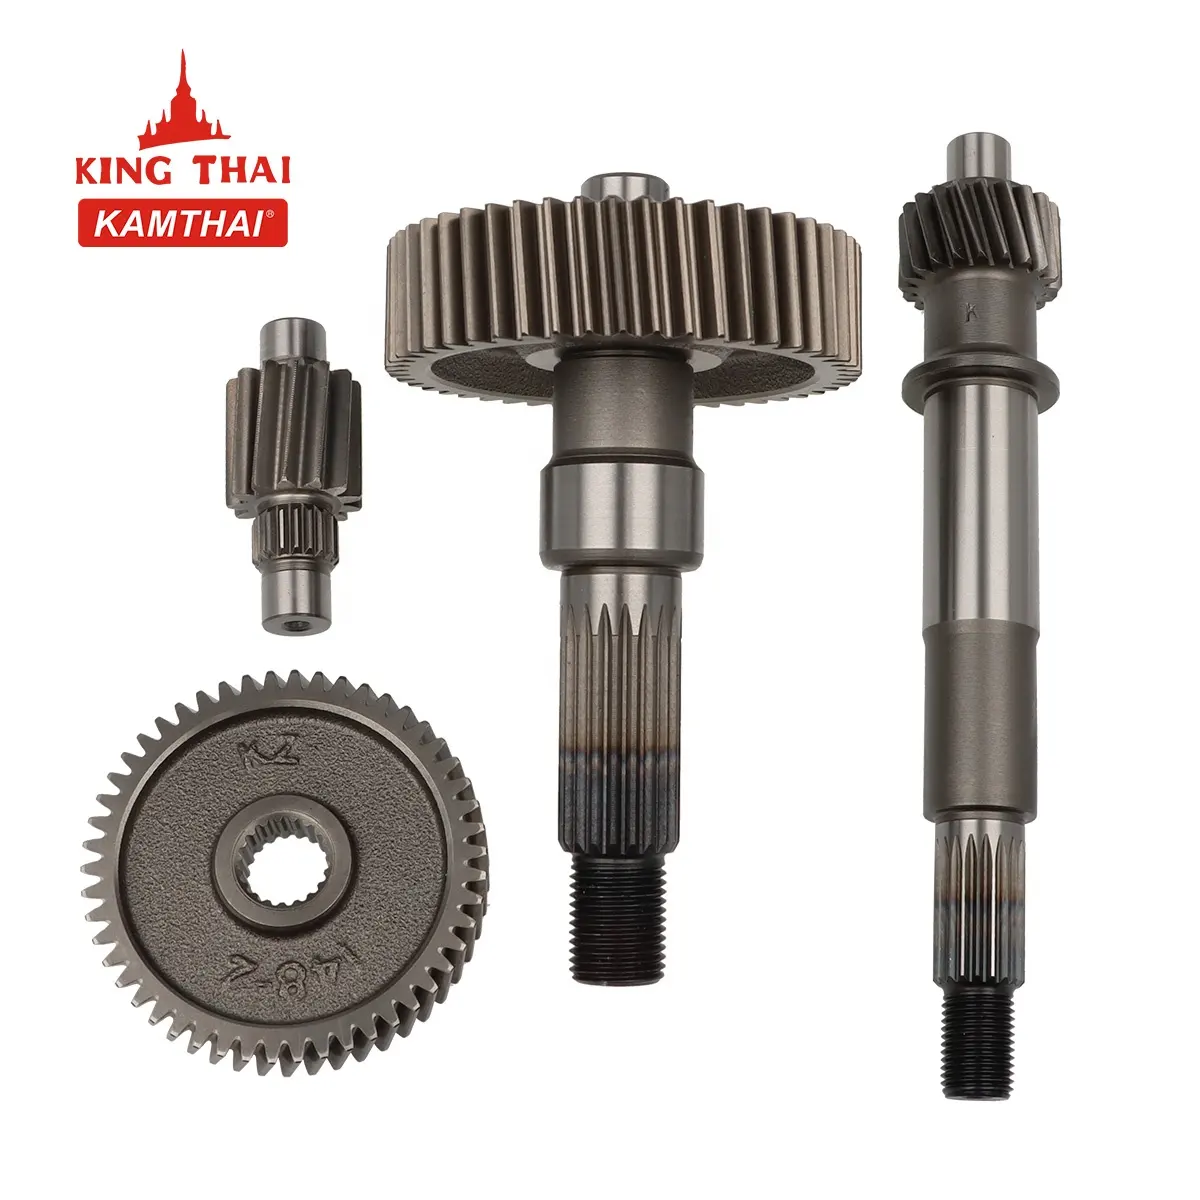 KAMTHAI Factory GGC Motorcycle Cg125 Transmission Gear Riding Gear Motorcycle Reverse Gear Box For Honda Motorcycle Double Speed